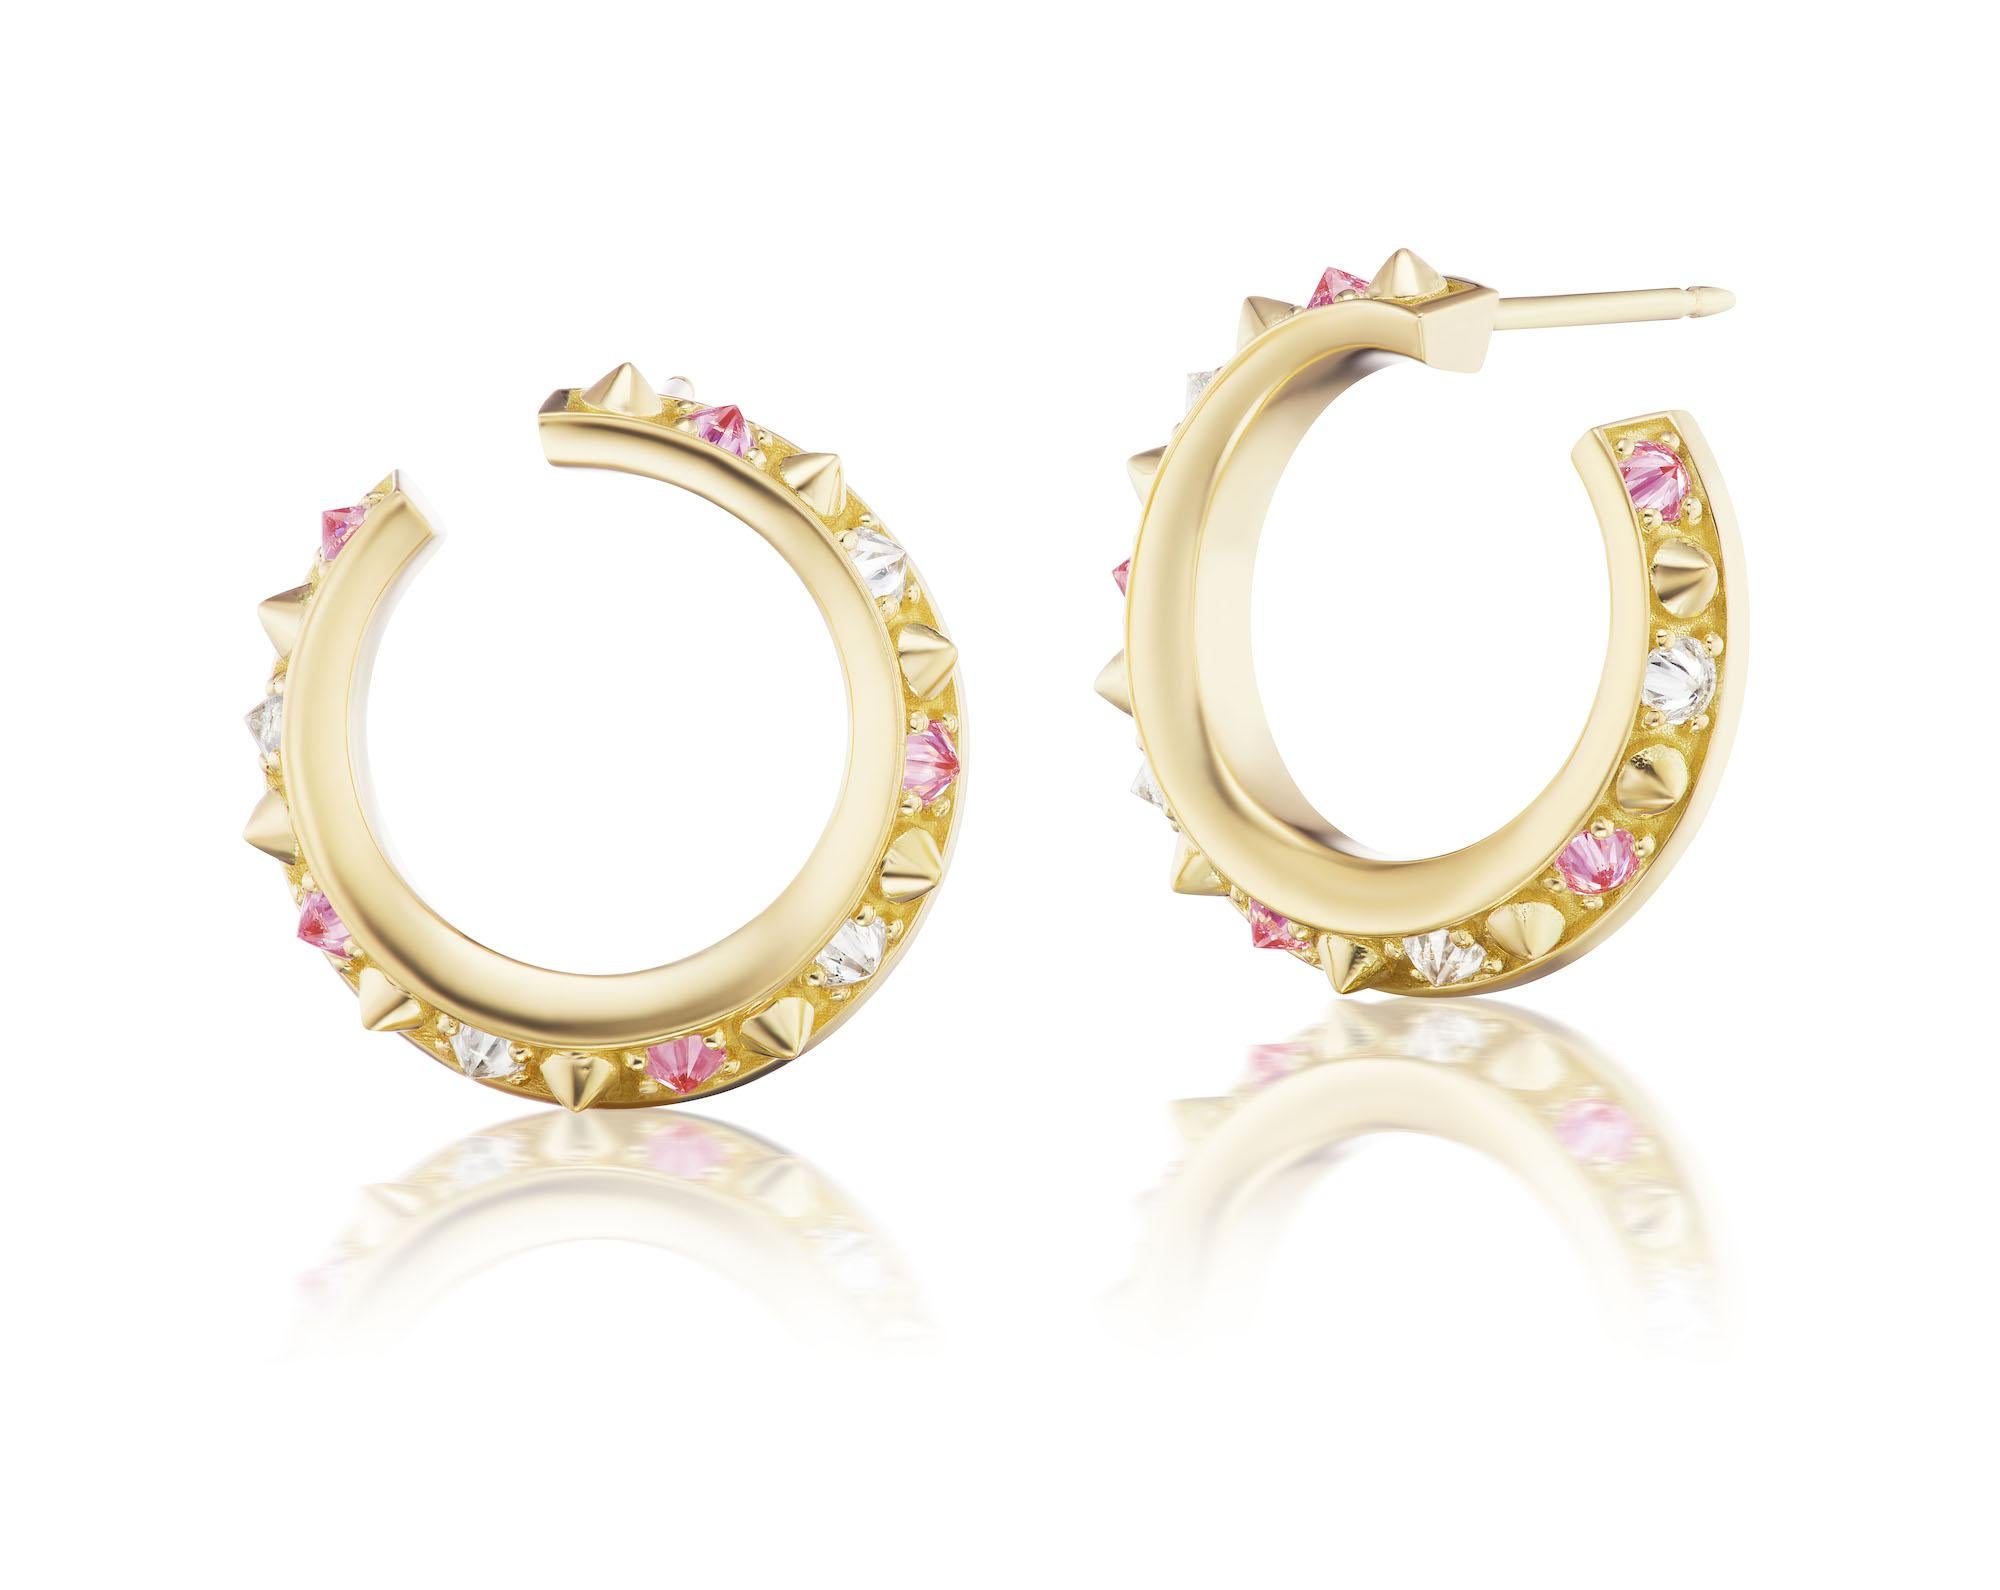 18k Yellow Gold, .76ct Pink Sapphire & .50ct Diamond

Design Inspiration

Ana-Katarina’s personal and design aesthetic leads her to create classic and timeless pieces with a wrinkle of modernism. Her Attitude Collection is influenced by the elegant